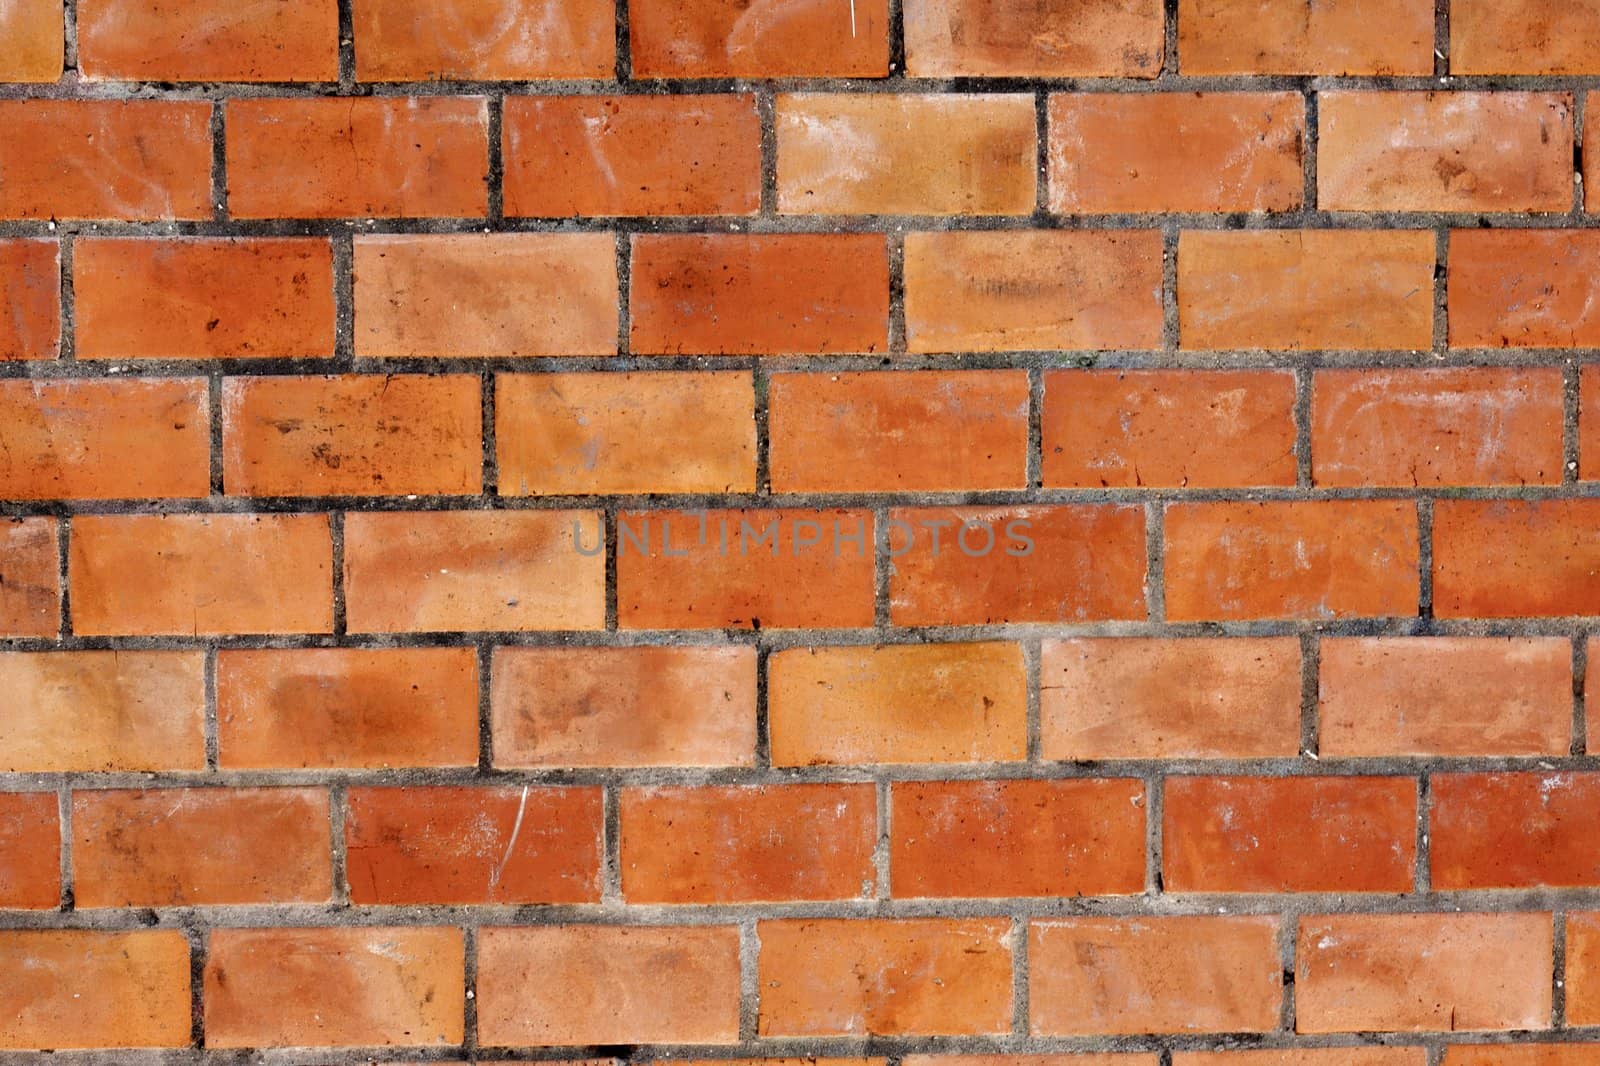 Close up view of a red brick wall texture.